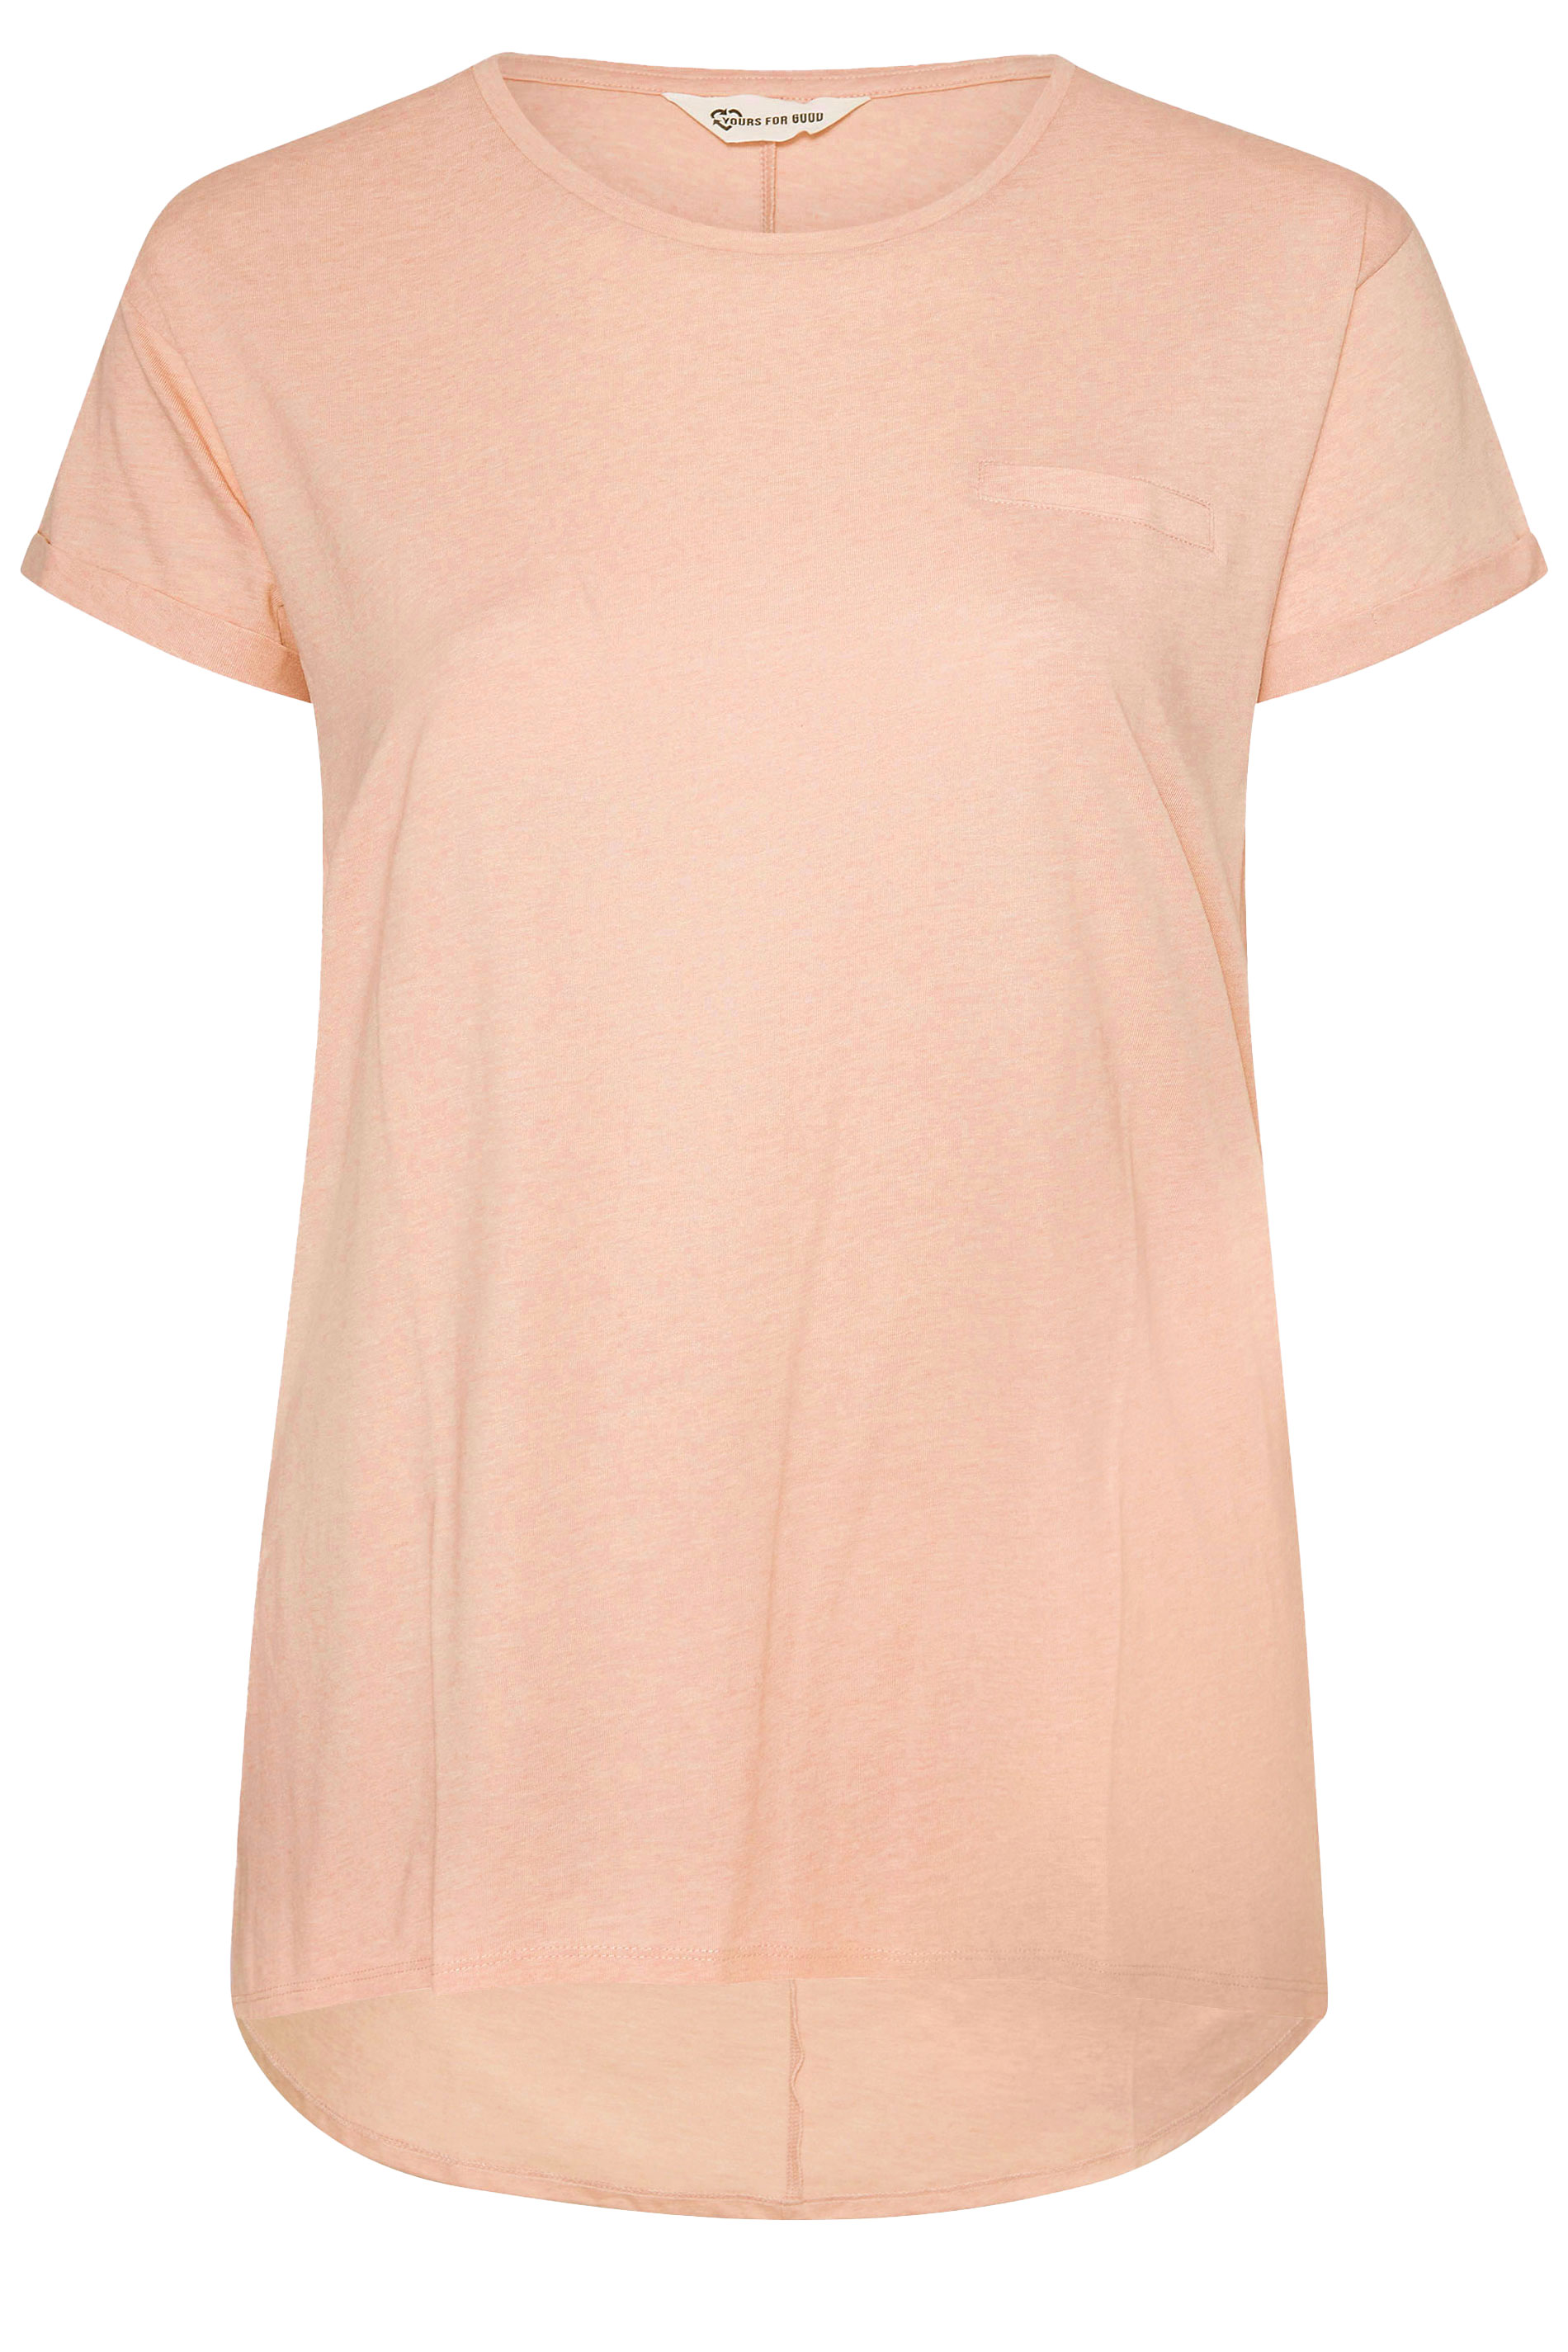 Grande taille  Tops Grande taille  Tops Casual | YOURS FOR GOOD - T-Shirt Rose Pâle en Coton Mixte - YT43004